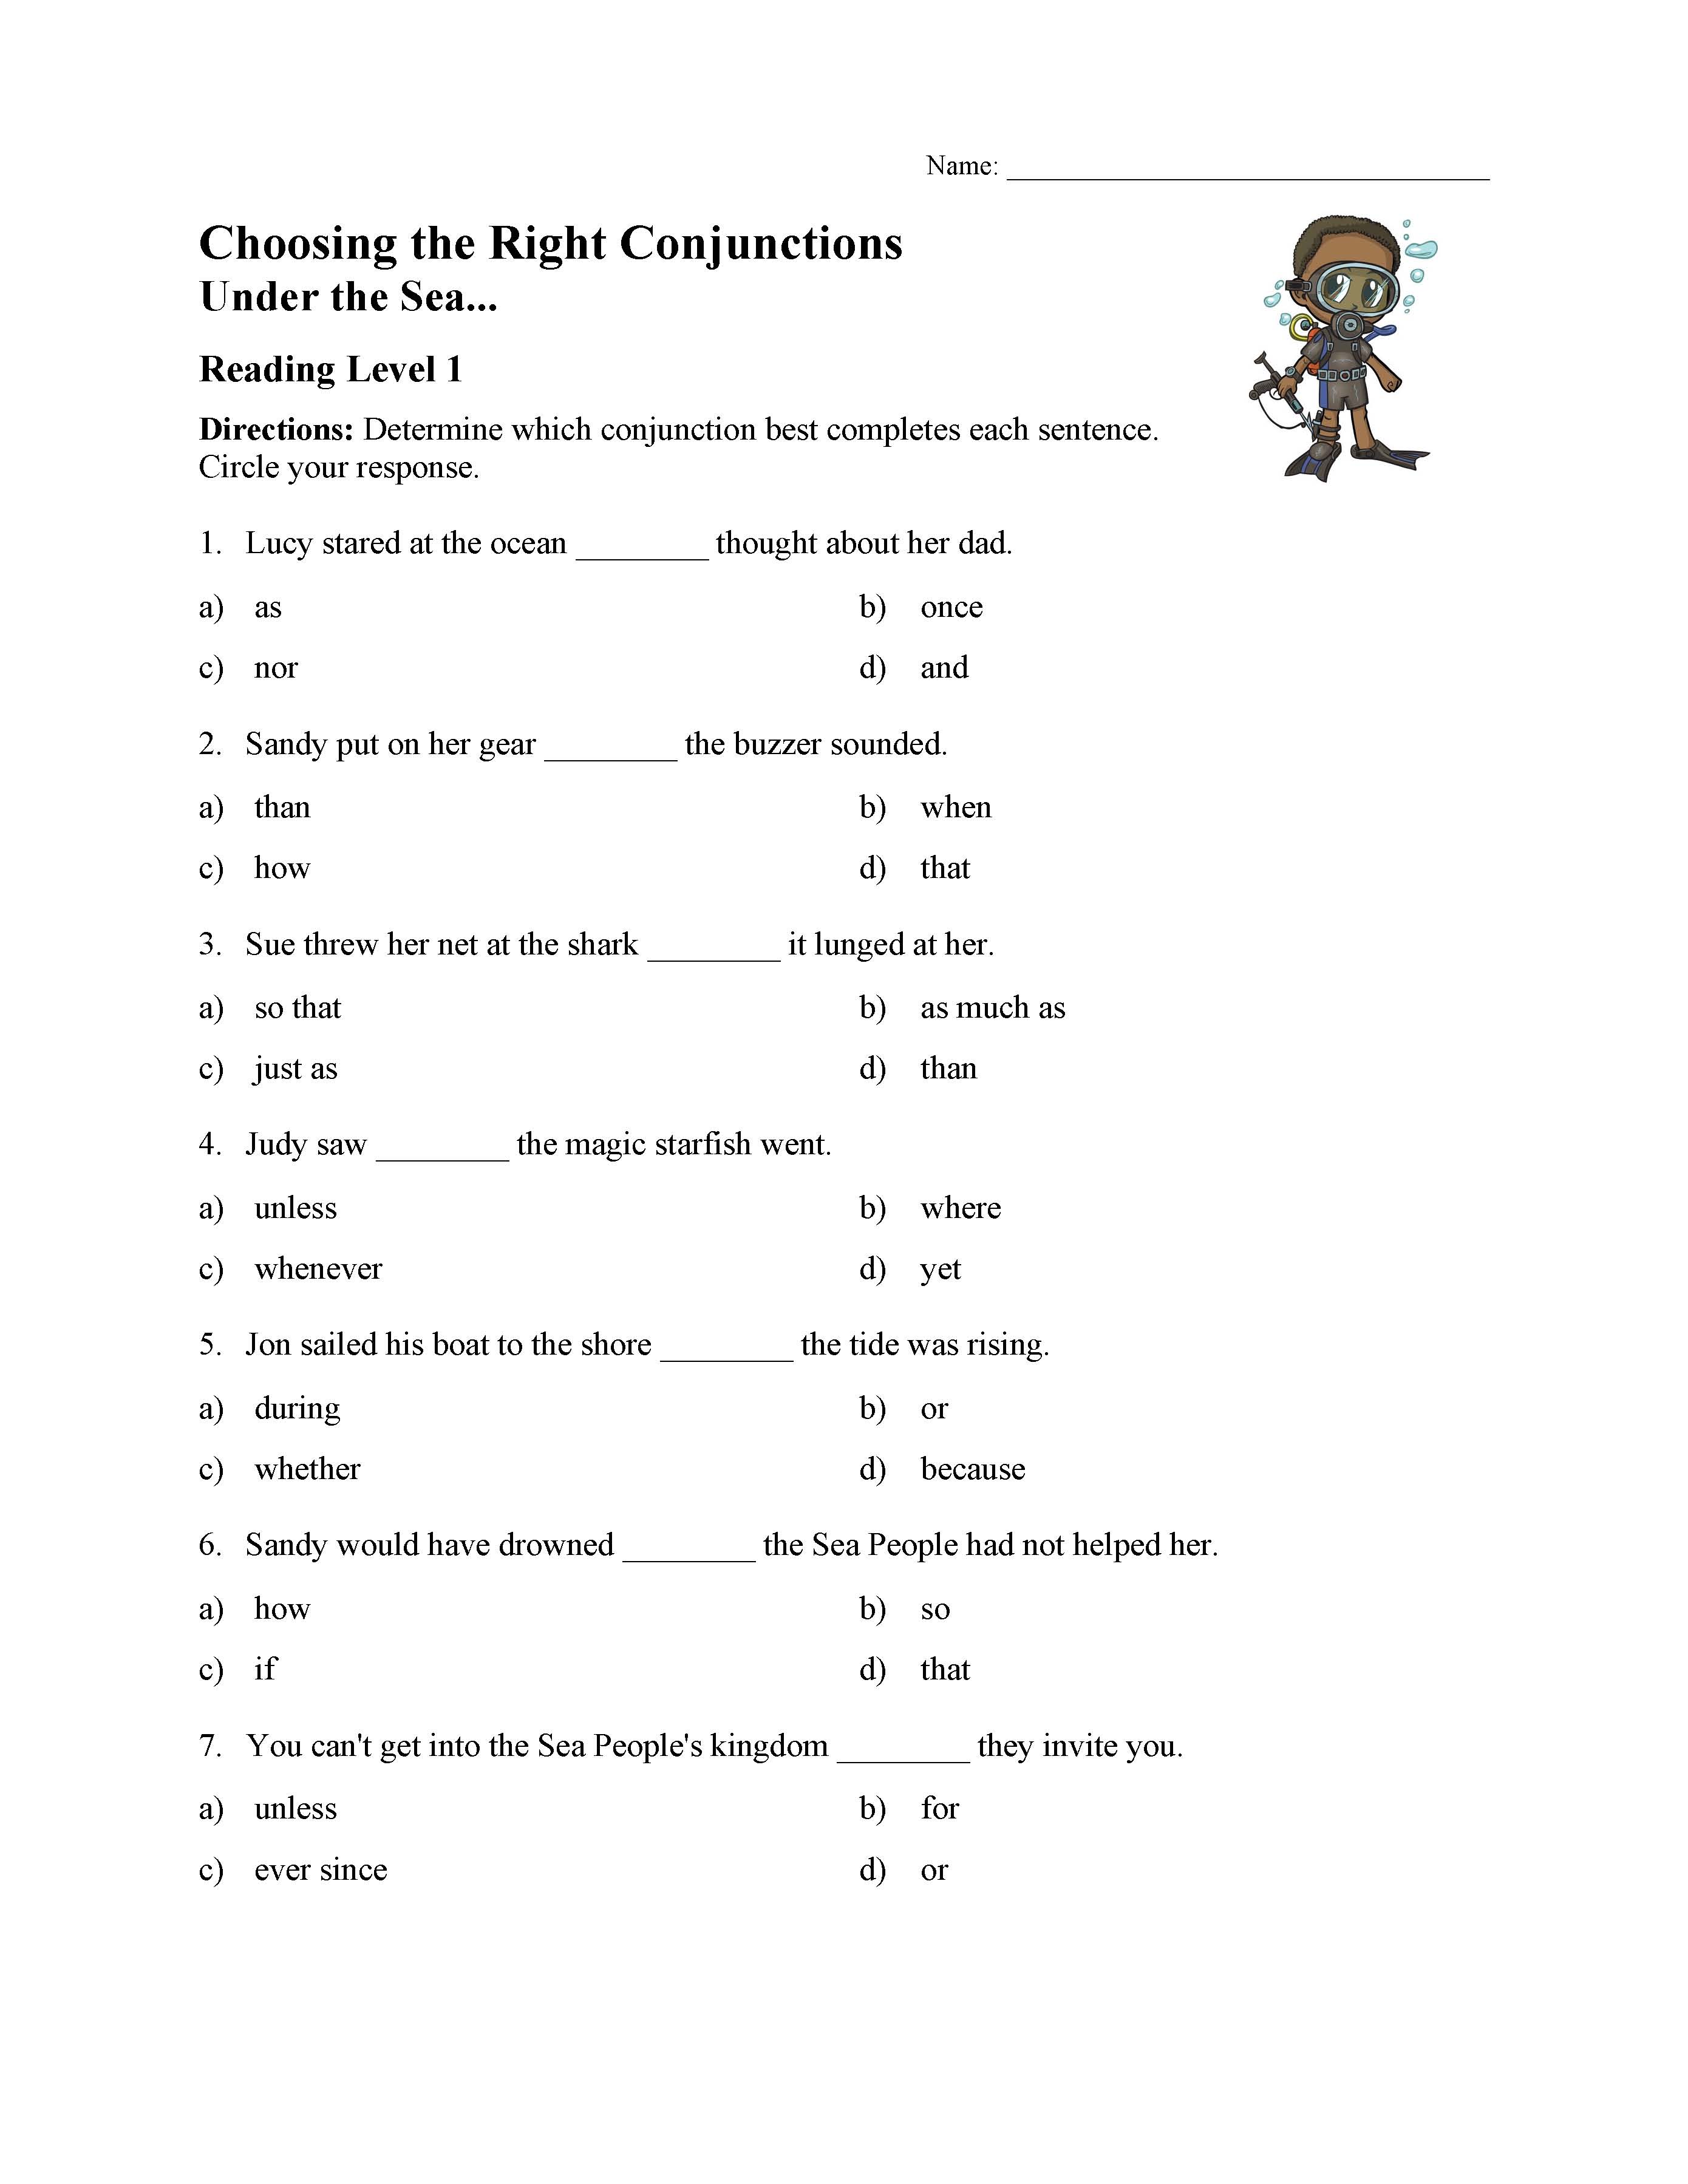 subordinating-conjunctions-worksheet-7th-grade-free-download-goodimg-co